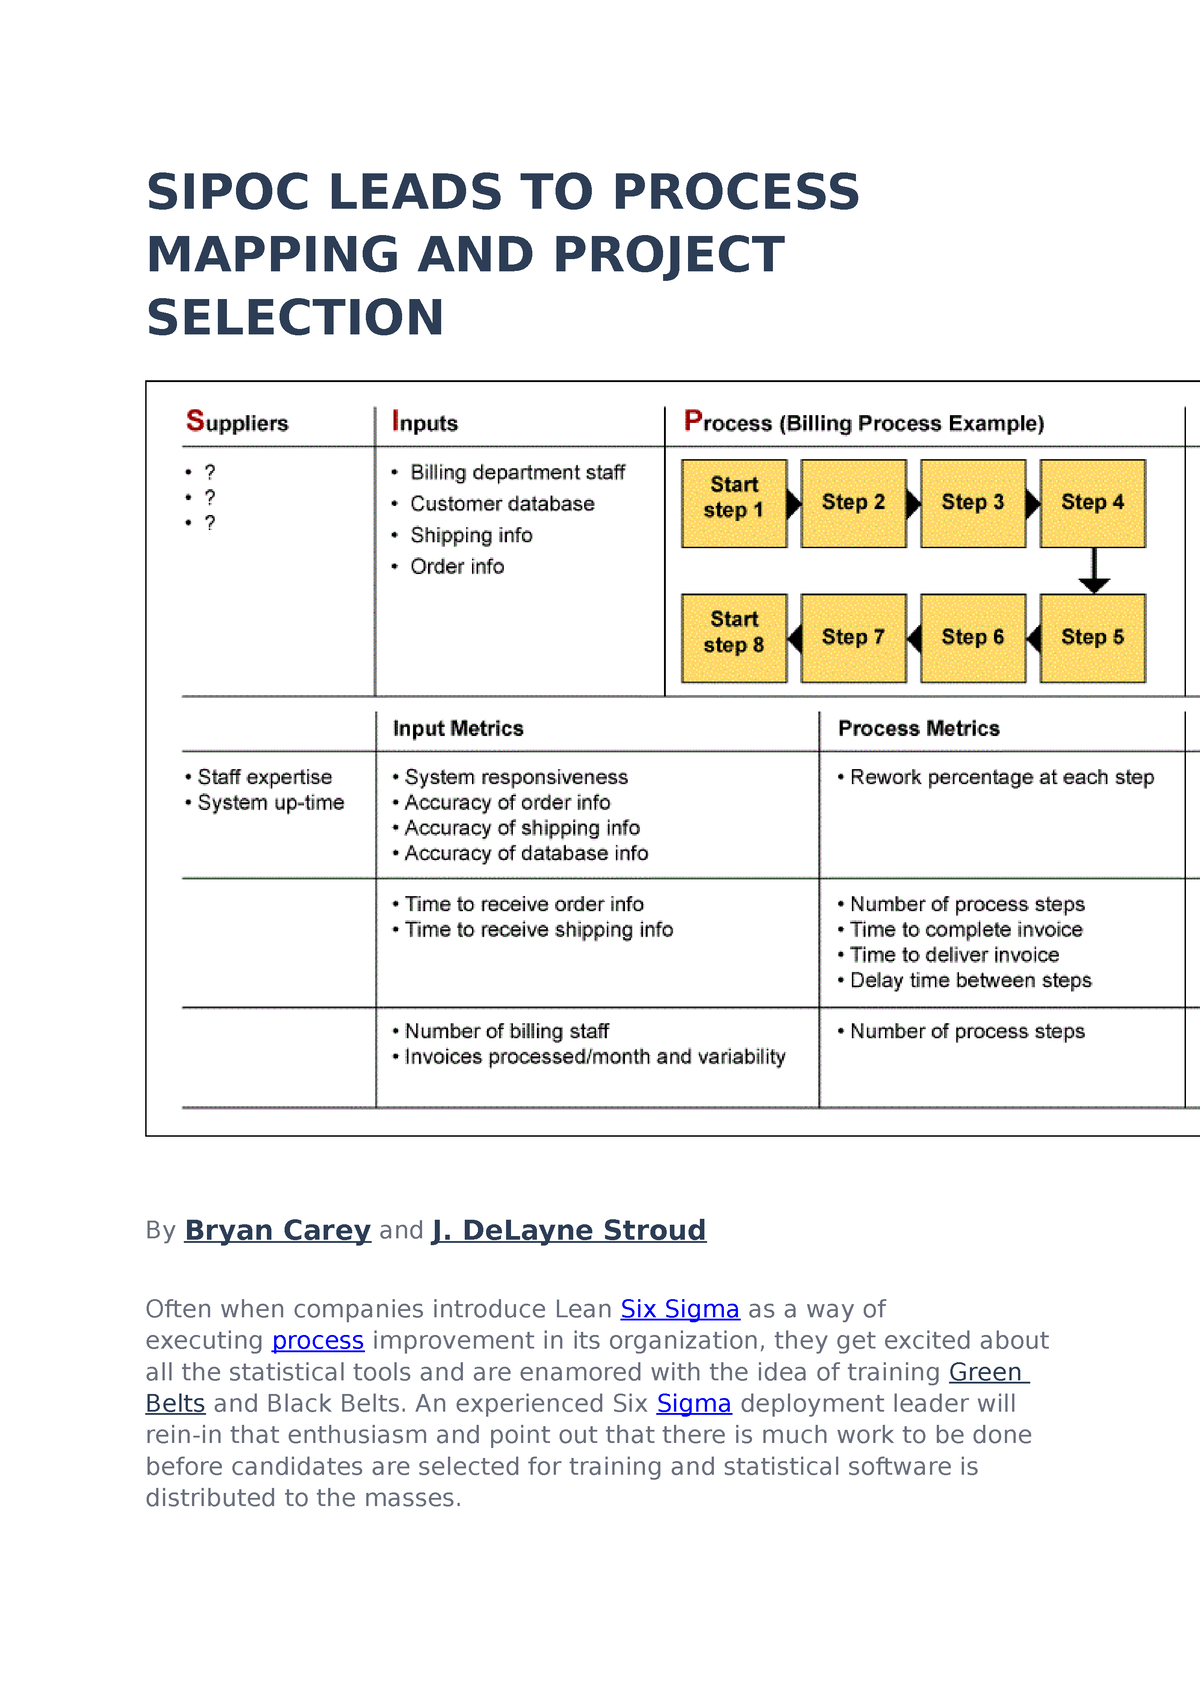 Sipoc Leads To Process Mapping And Project Selection 1023